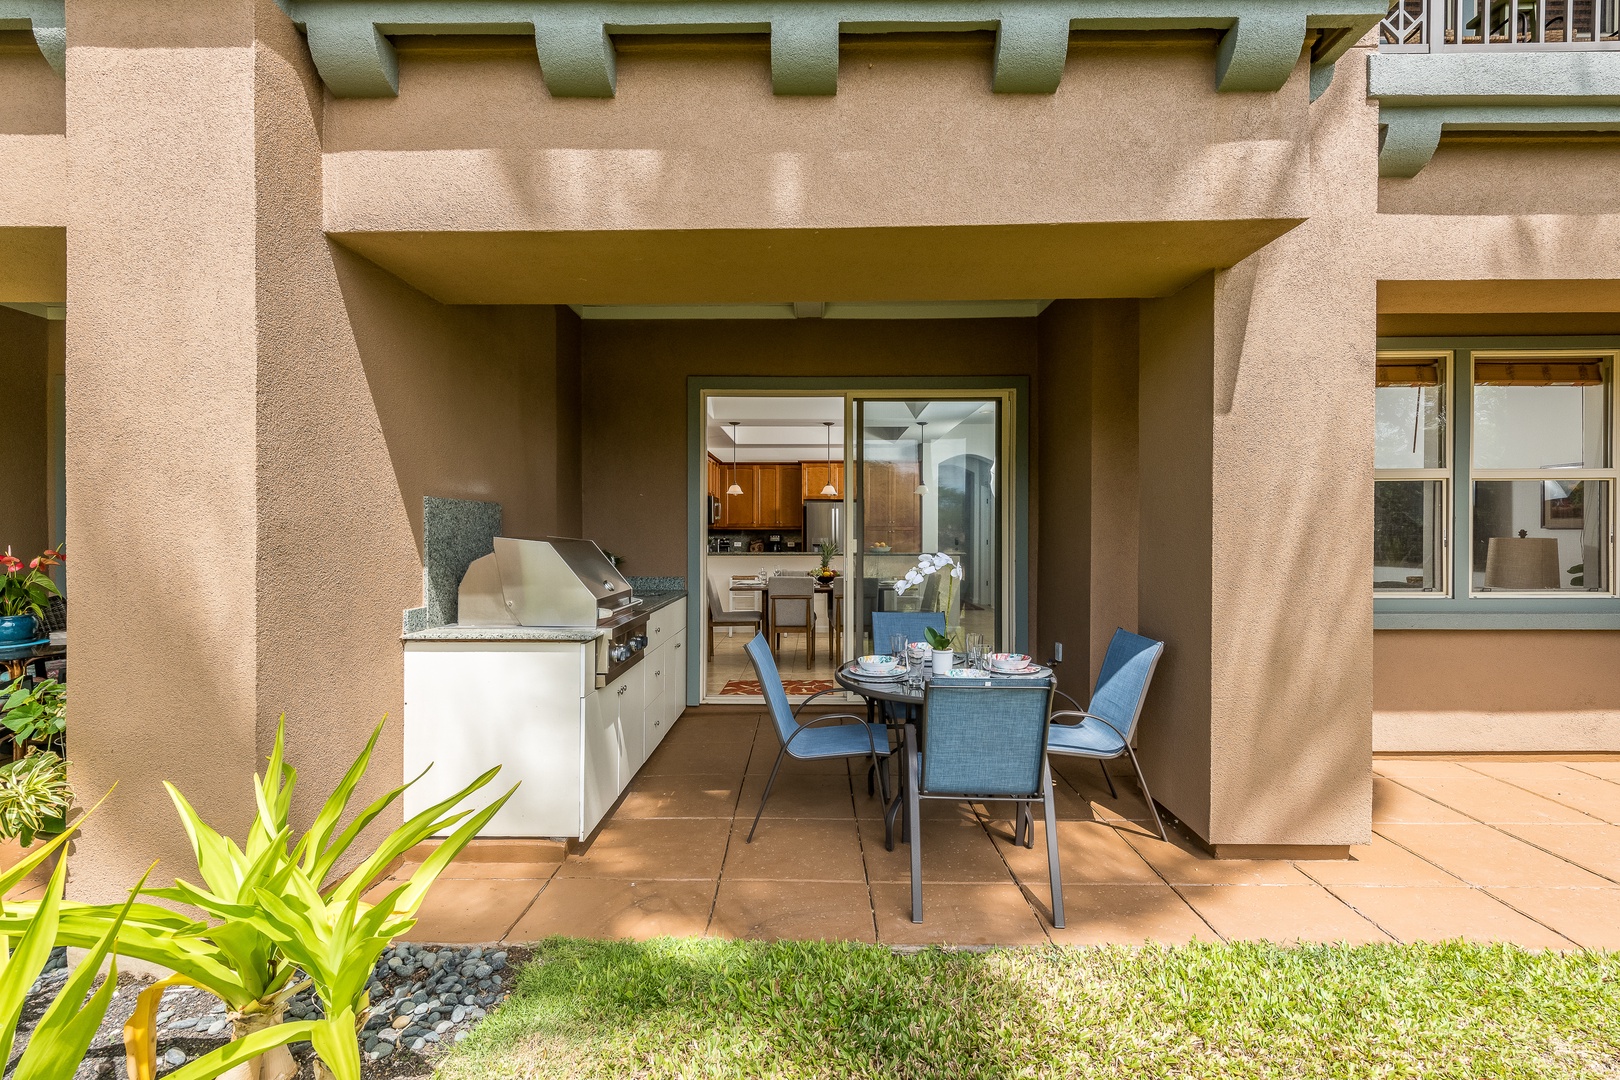 Kamuela Vacation Rentals, Mauna Lani Fairways #603 - Dine indoors, then step out to the patio for BBQ delights!